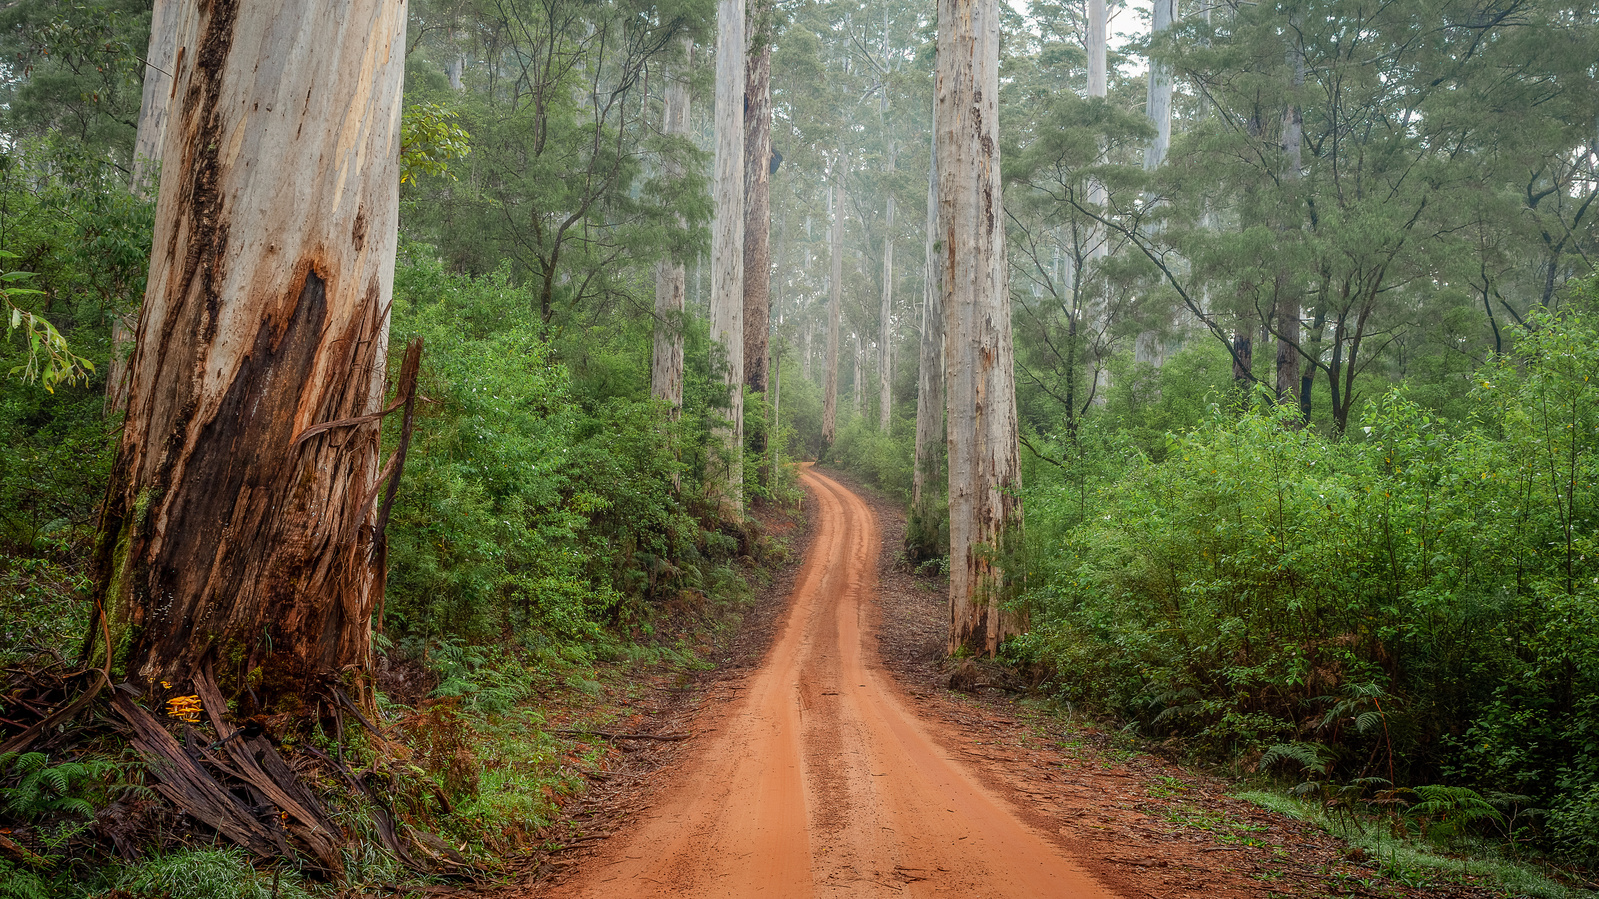 A winding road through the Karri Forrest in Pemberton.